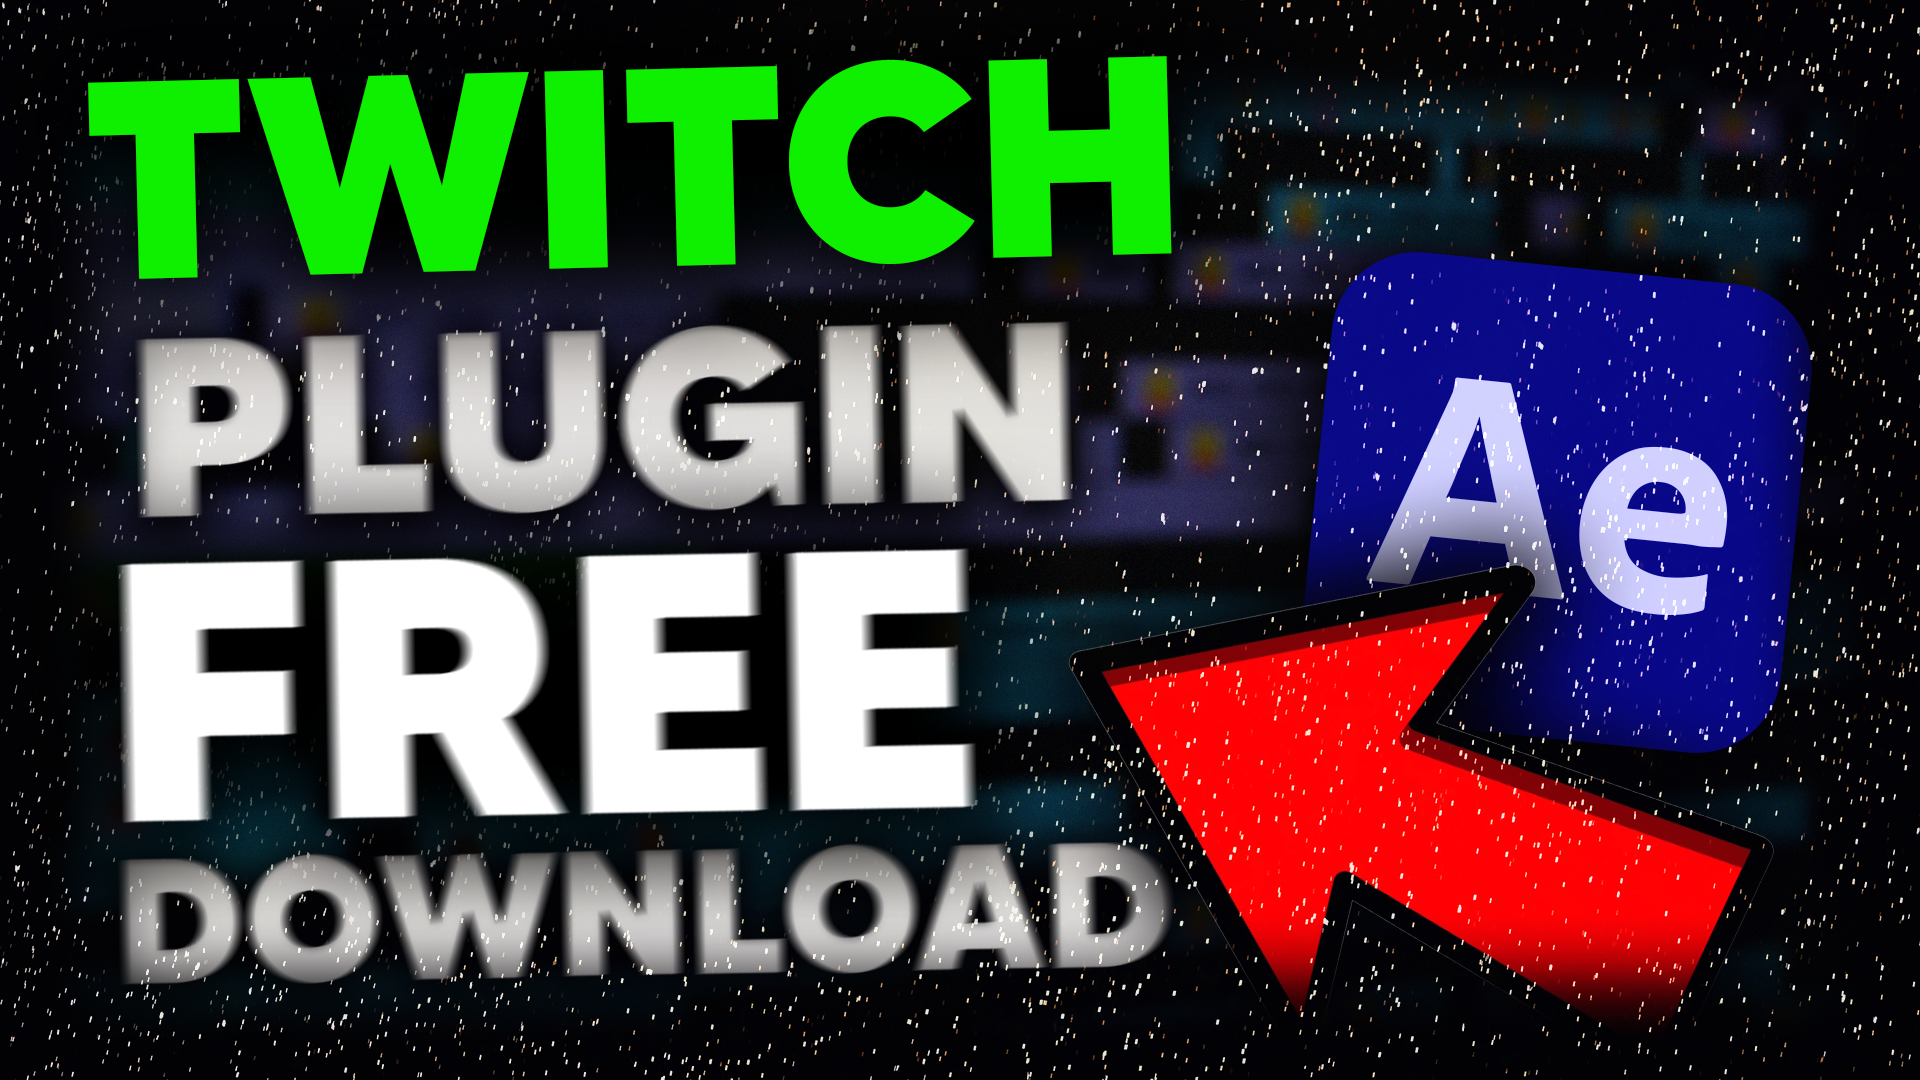 Twitch Plugin Free Download After Effects